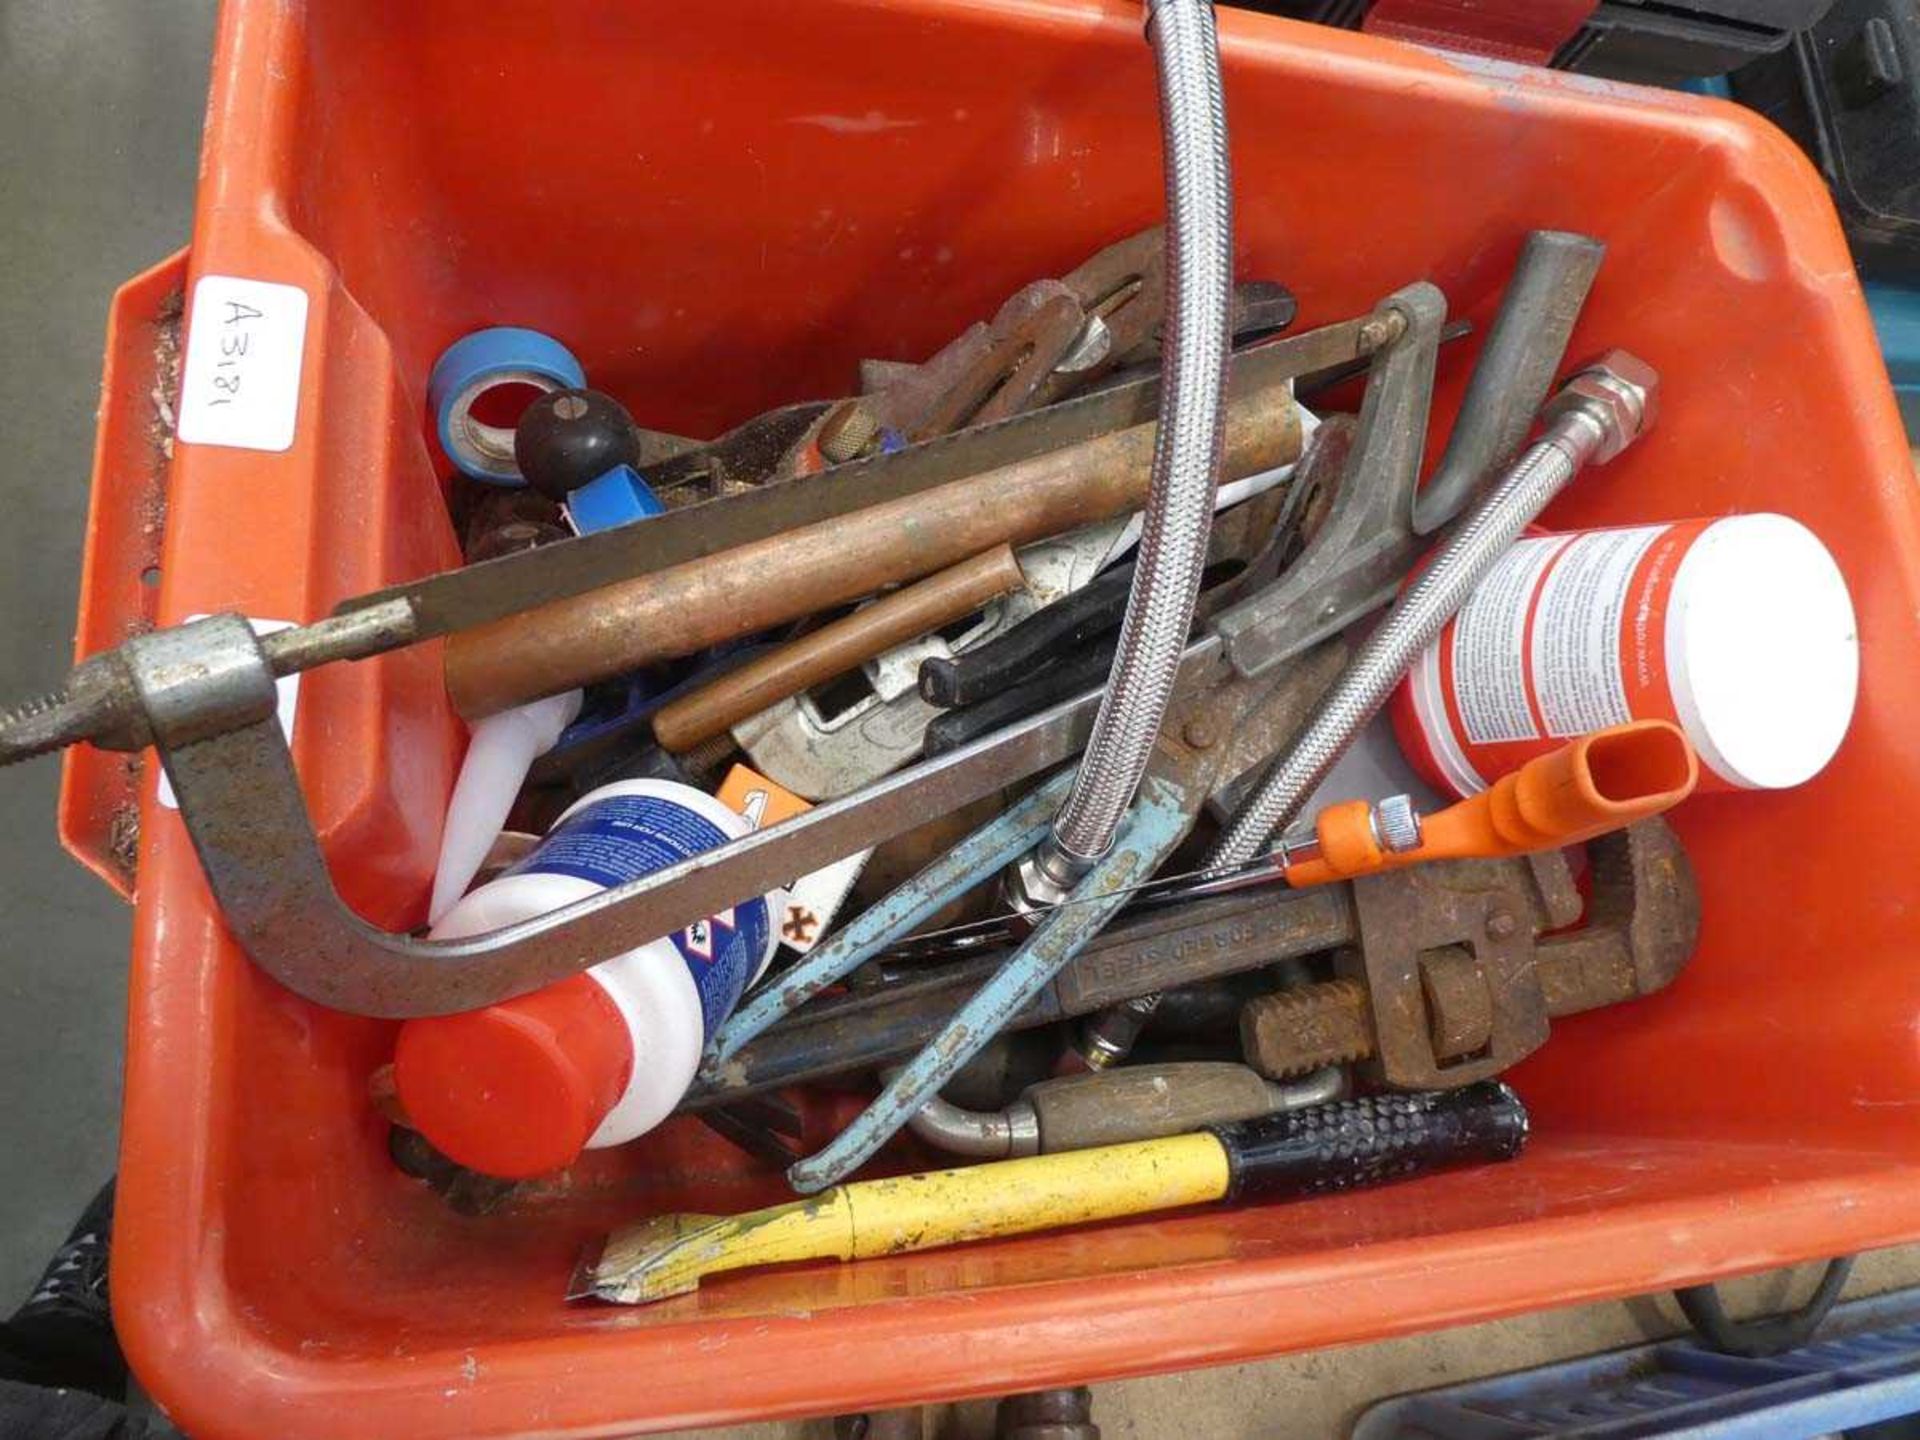 Red plastic tool box containing saws, tin snips, stilsons, scrapers etc